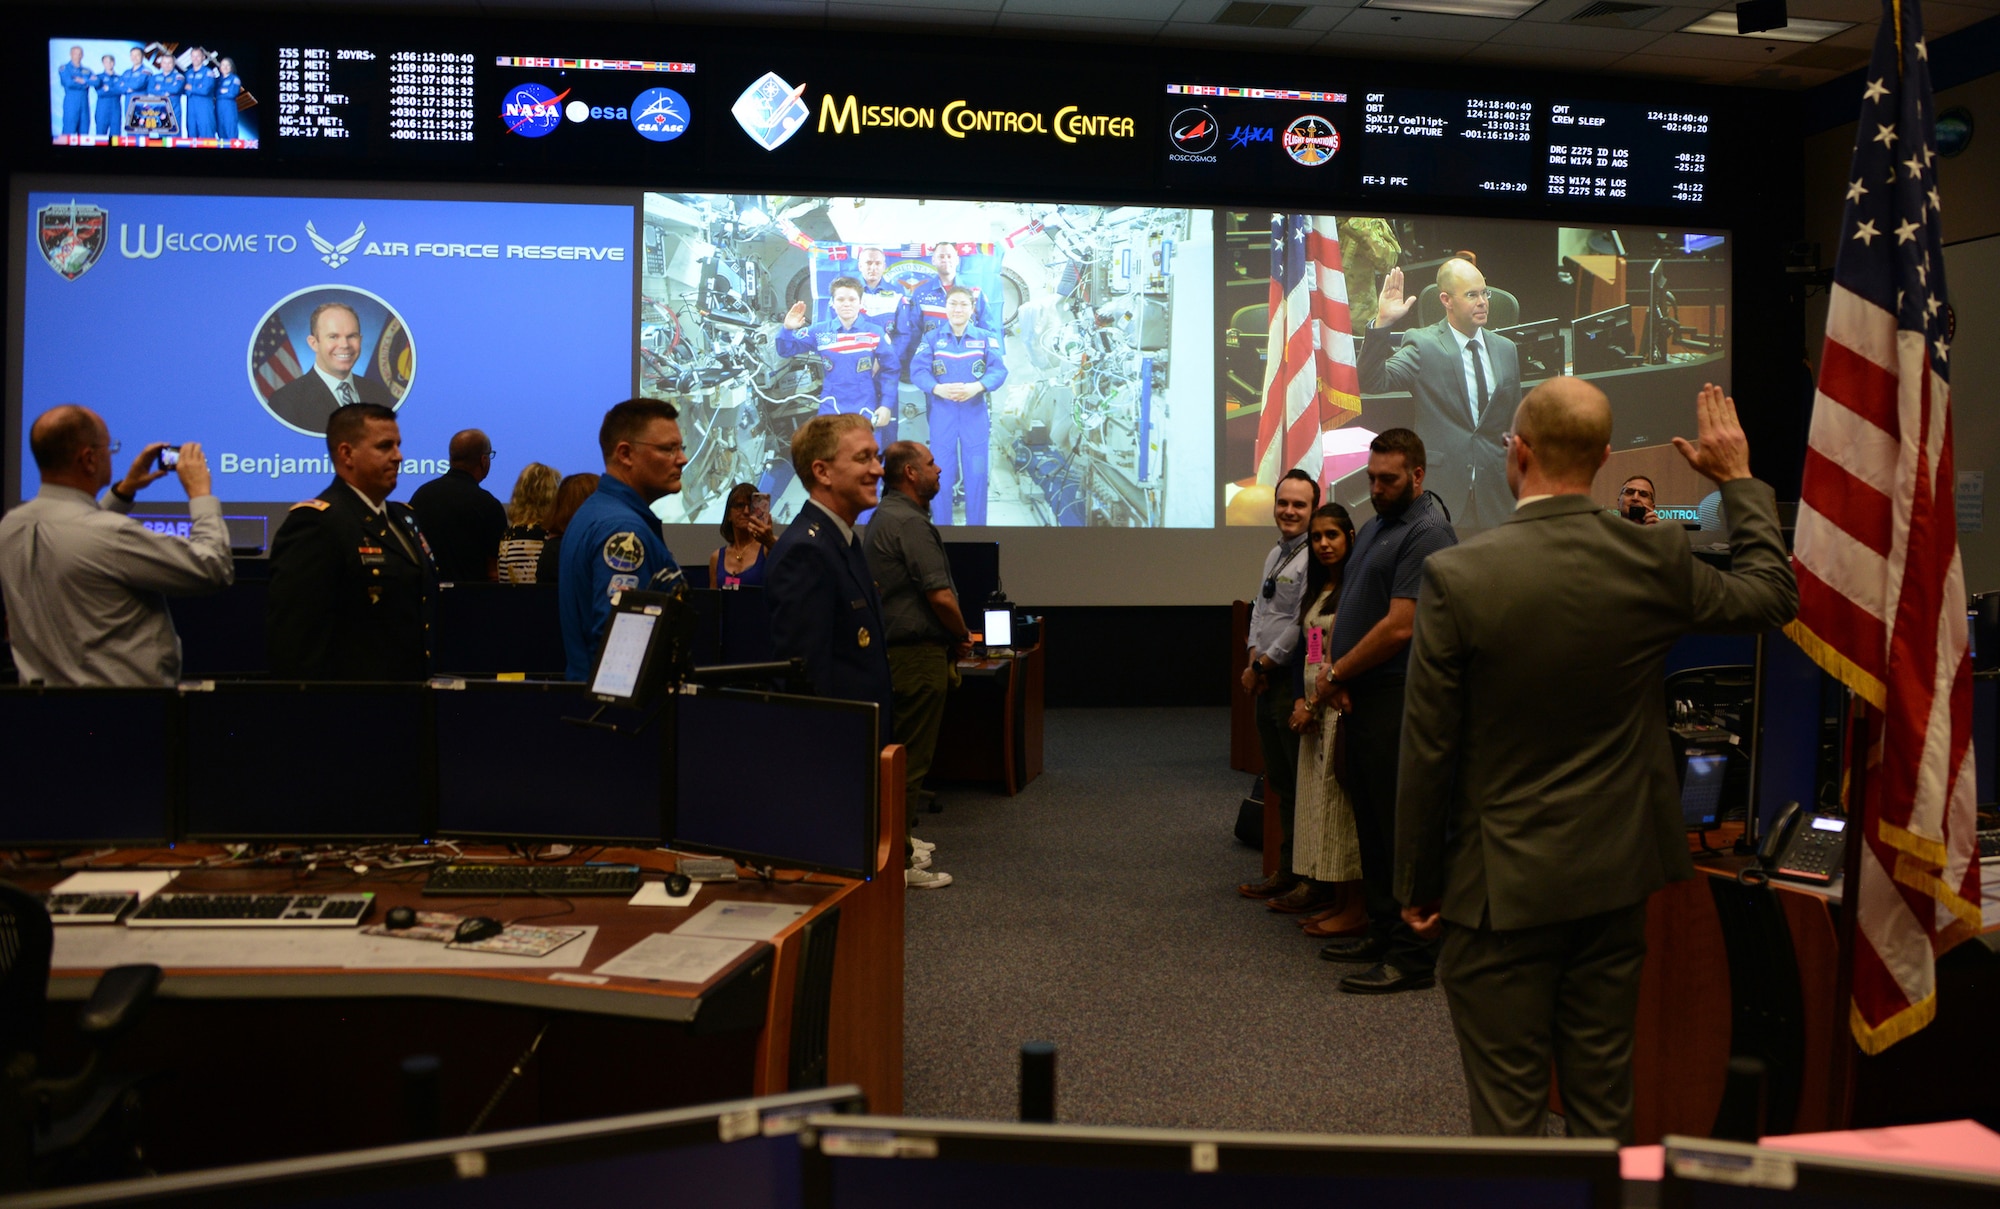 Dr. Benjamin Johansen, stands with his right hand raised as he is administered the commissioning oath by Army Lt. Col. Anne McClain, an astronaut on the International Space Station, 210 miles above earth. Johansen is joining the Air Force Reserve as a flight surgeon and will wear the rank of a captain, but as a civilian he is a flight surgeon with NASA and is assigned as one of two flight surgeons for McClain. (Air Force photo/Master Sgt. Chance Babin)